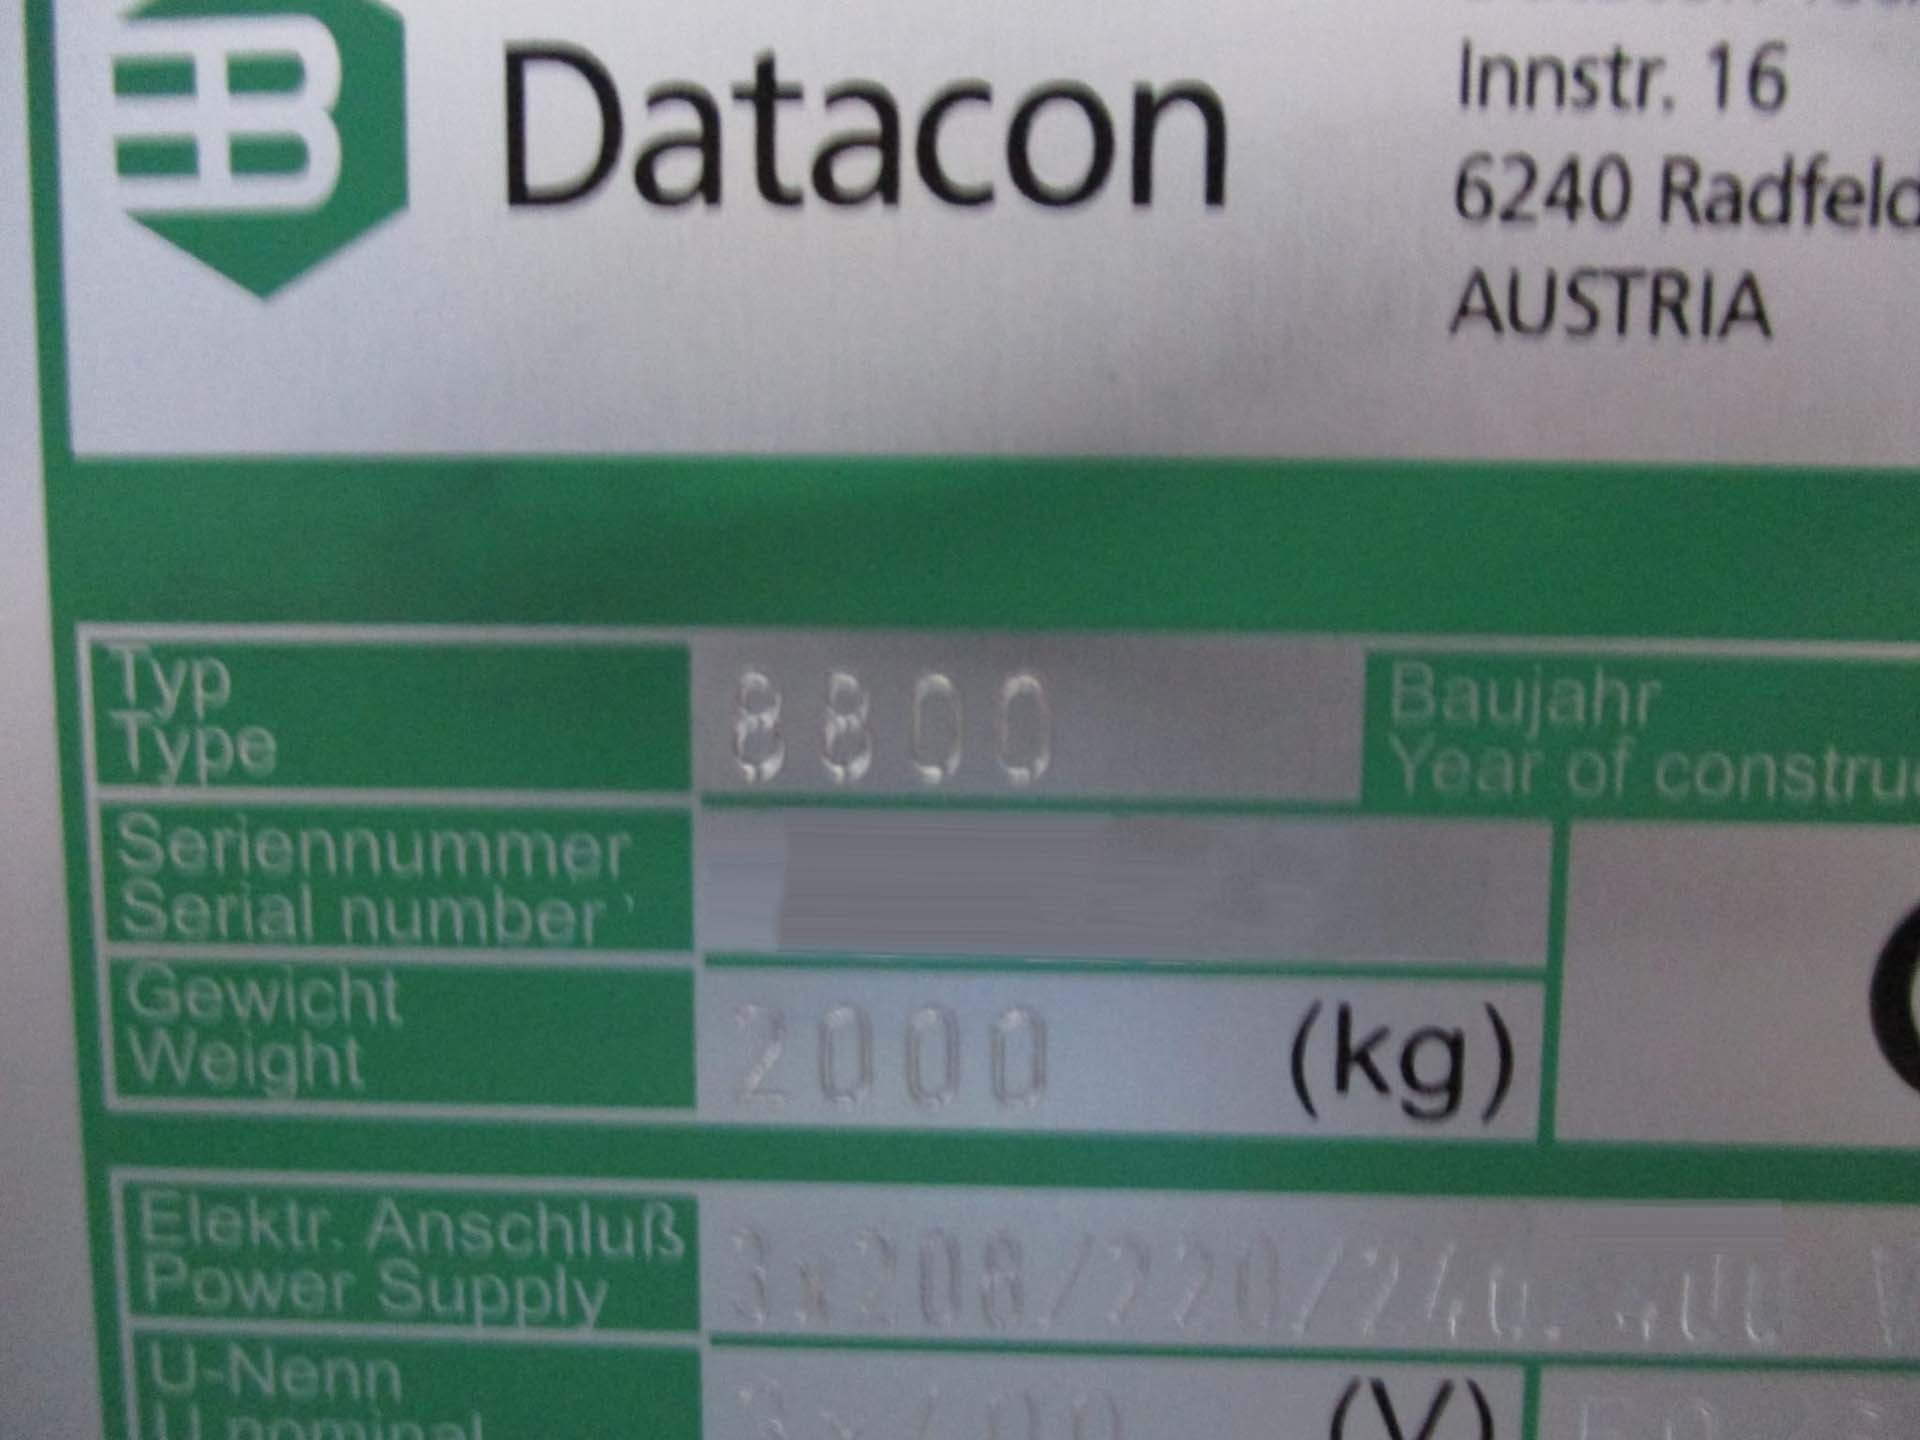 Photo Used DATACON / BESI 8800 Chameo For Sale